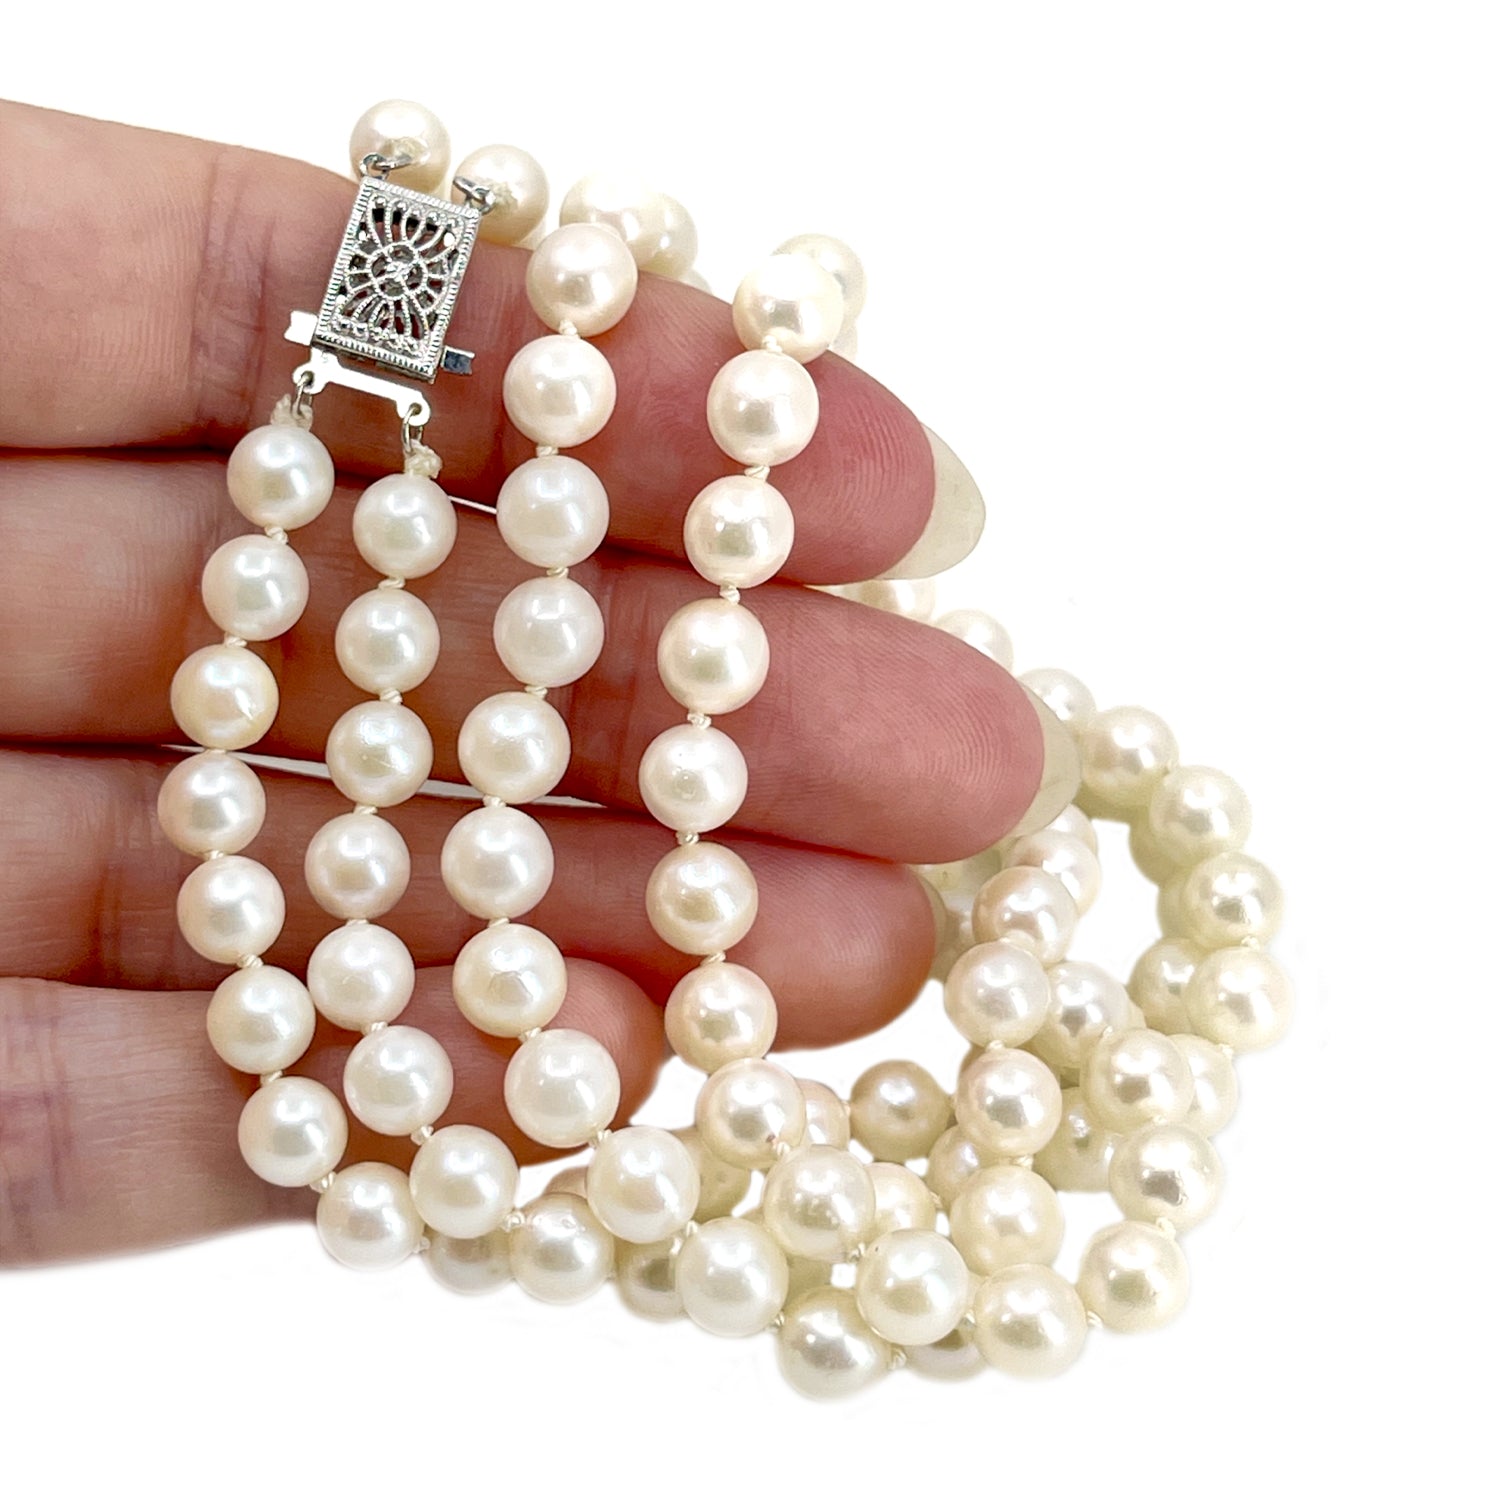 Choker Double Strand Vintage Japanese Saltwater Cultured Akoya Pearl Necklace - 14K White Gold 15.25 & 16.75 Inch